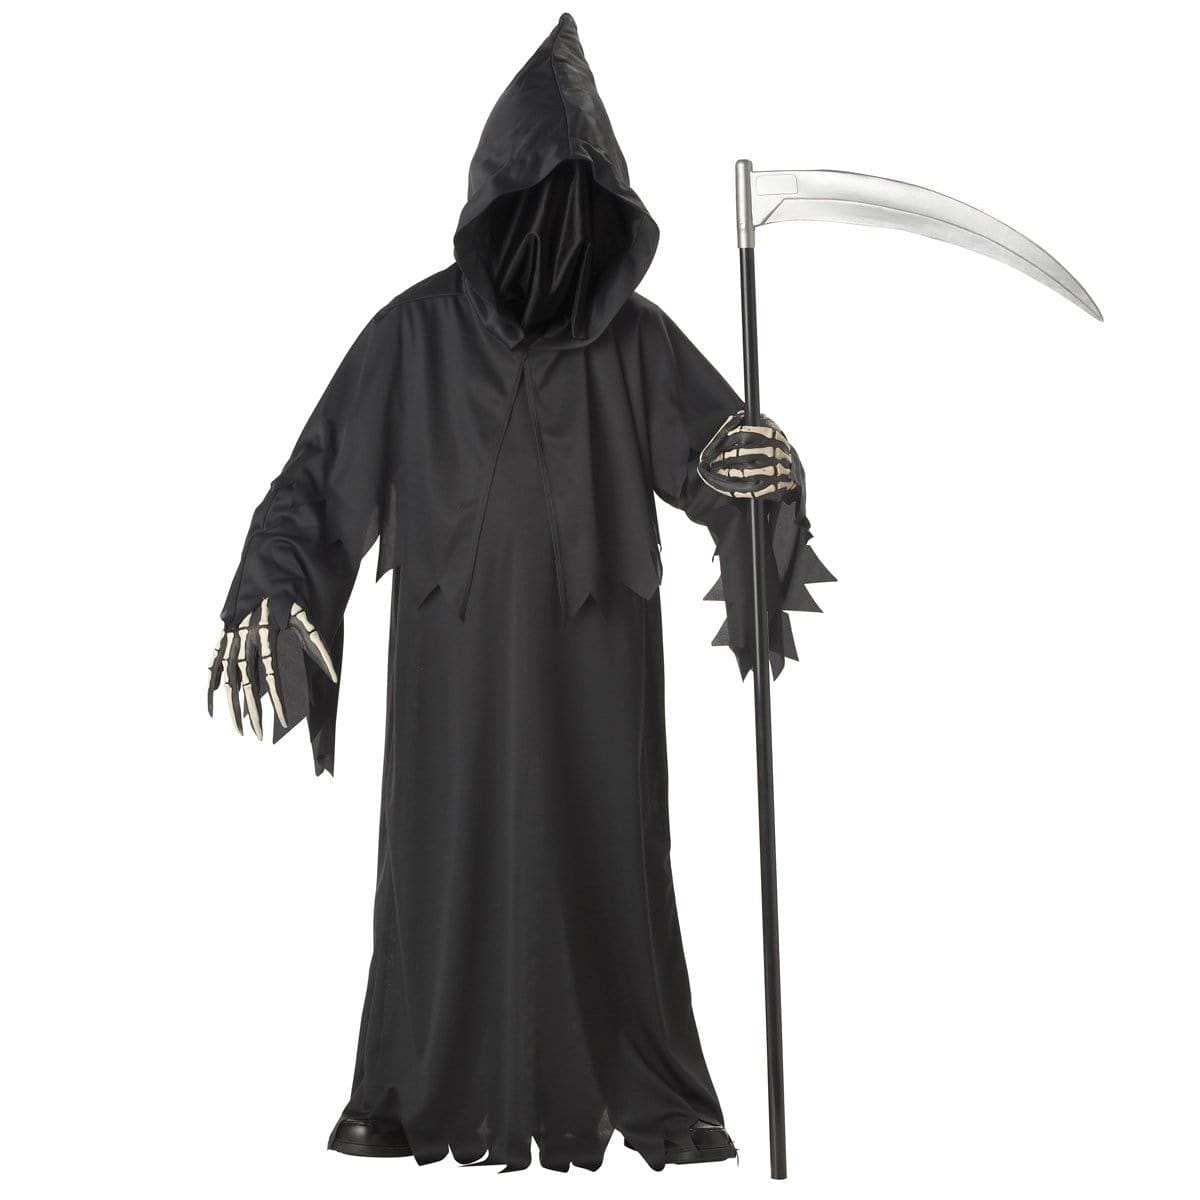 Buy Costumes Grim reaper deluxe costume for boys sold at Party Expert